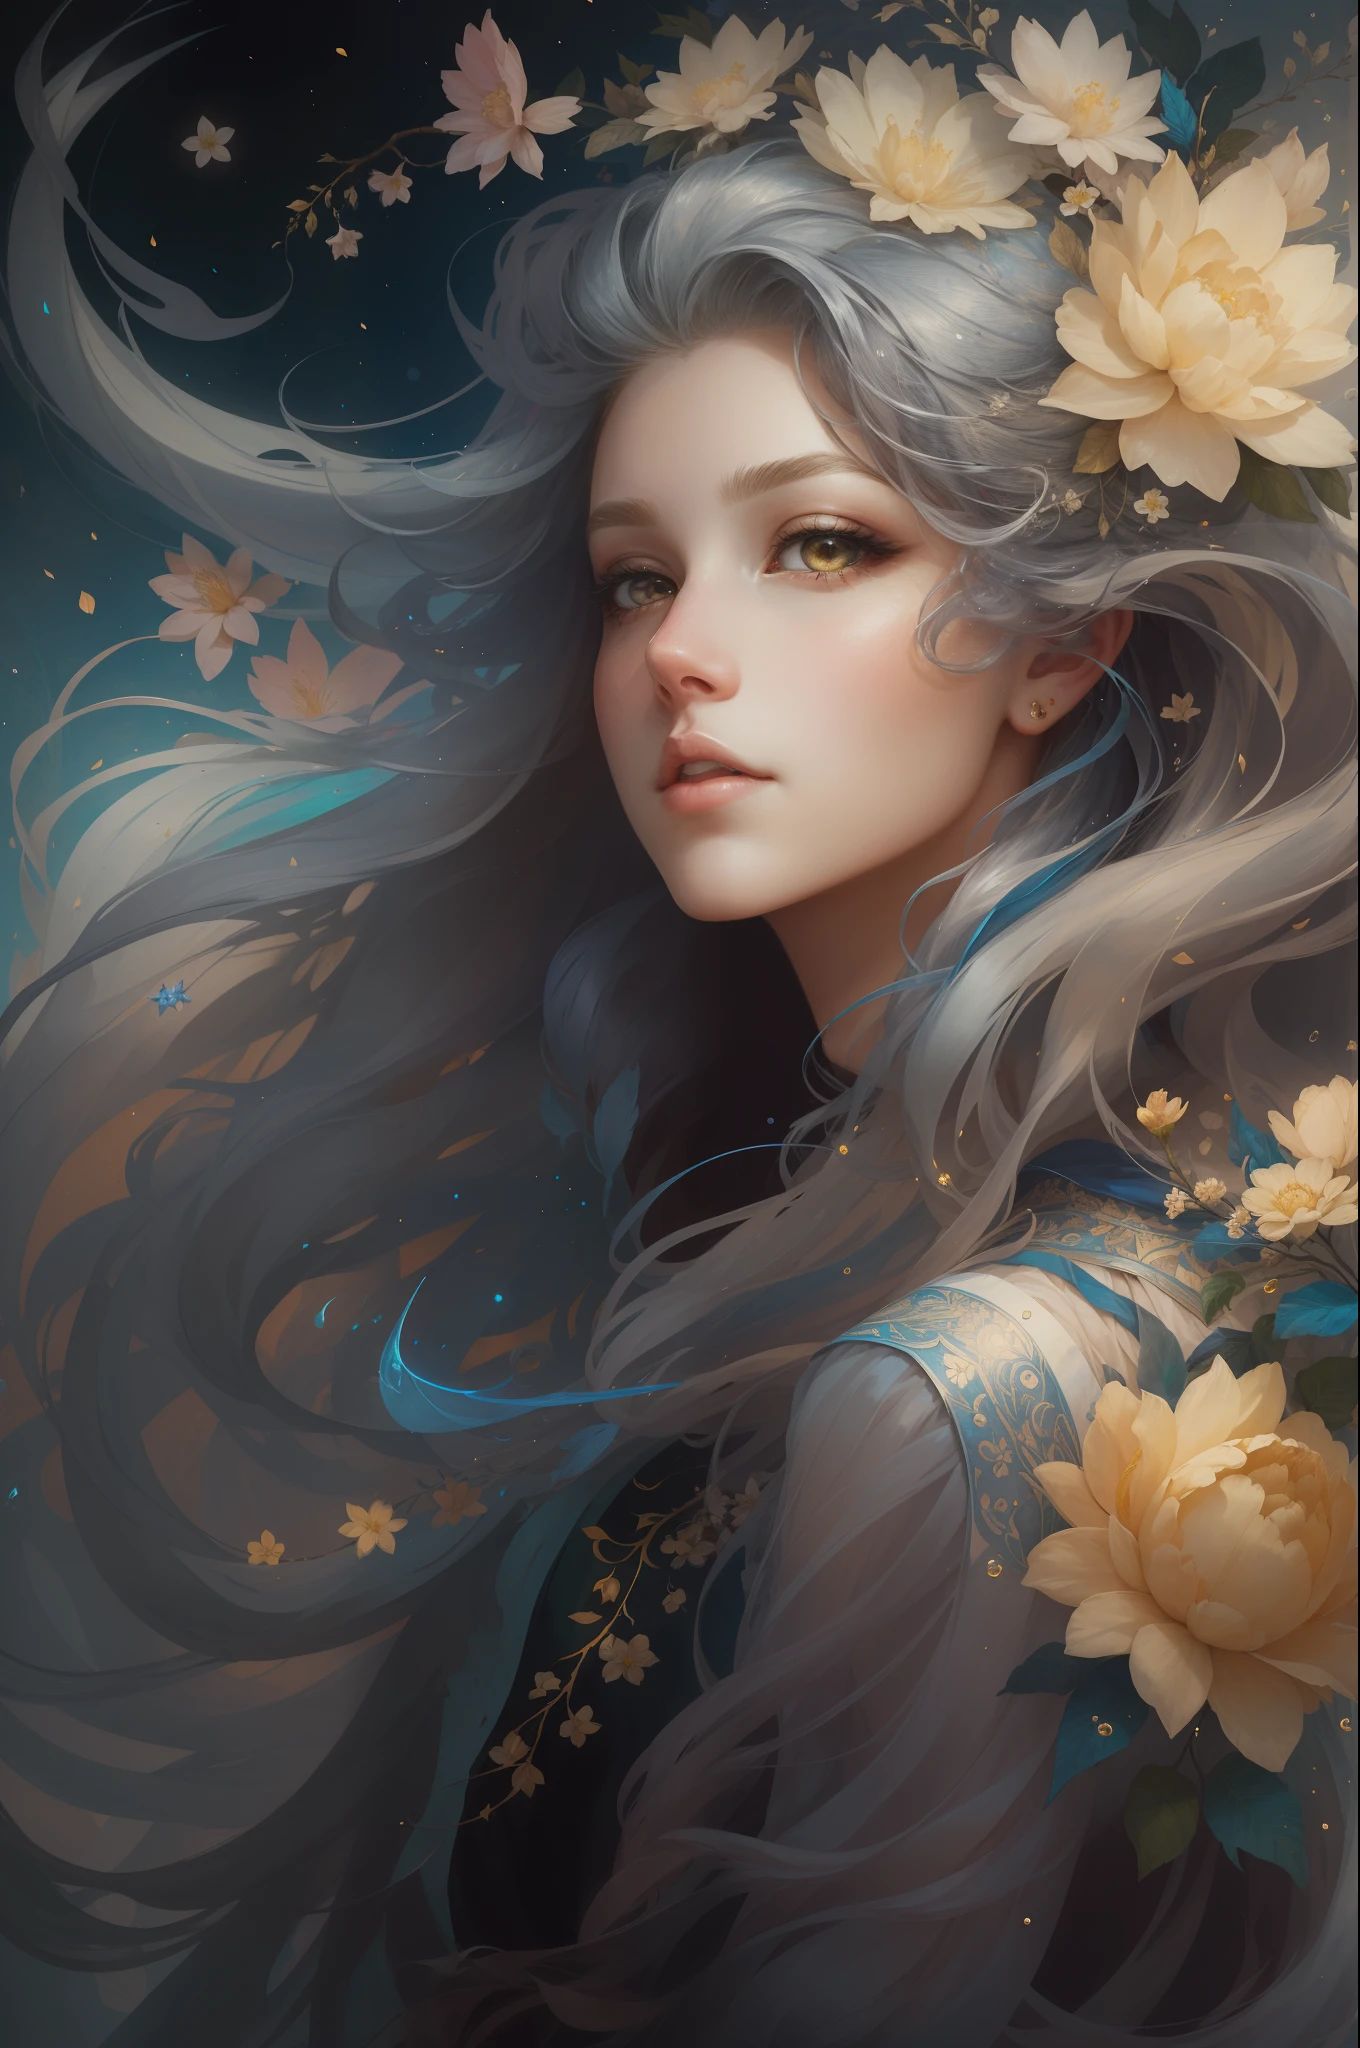 （（Gorgeous female princess）），（She has long flowing gray hair），（Bright and beautiful eyes），trendding on artstation，Flowers of Hope by Jean-Honor Fragonard，Peter Mohrbacher，ultra-detailliert，insanely details, Amazing, complex, elite, Art Nouveau, a gorgeous, Liquid wax, elegant, Luxurious, greg rutkovsky, Ink style, a sticker, Vector art beautiful character design, Dual exposure shooting, Luminous design, winning artwork, tmasterpiece, AMOLED black background,optic